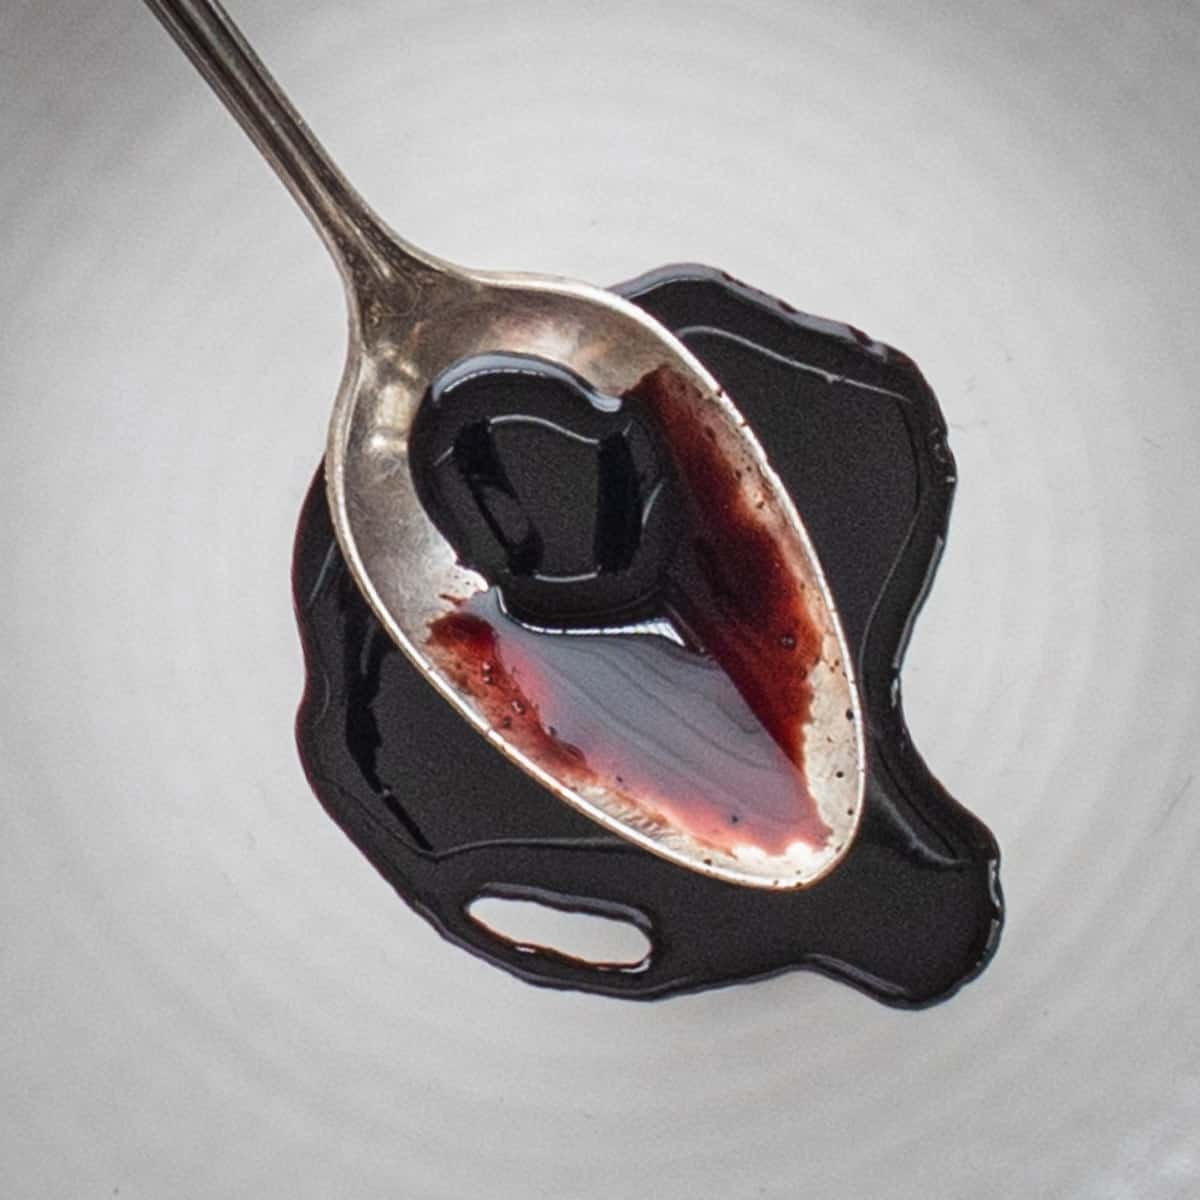 A black syrup on a white plate with a spoon